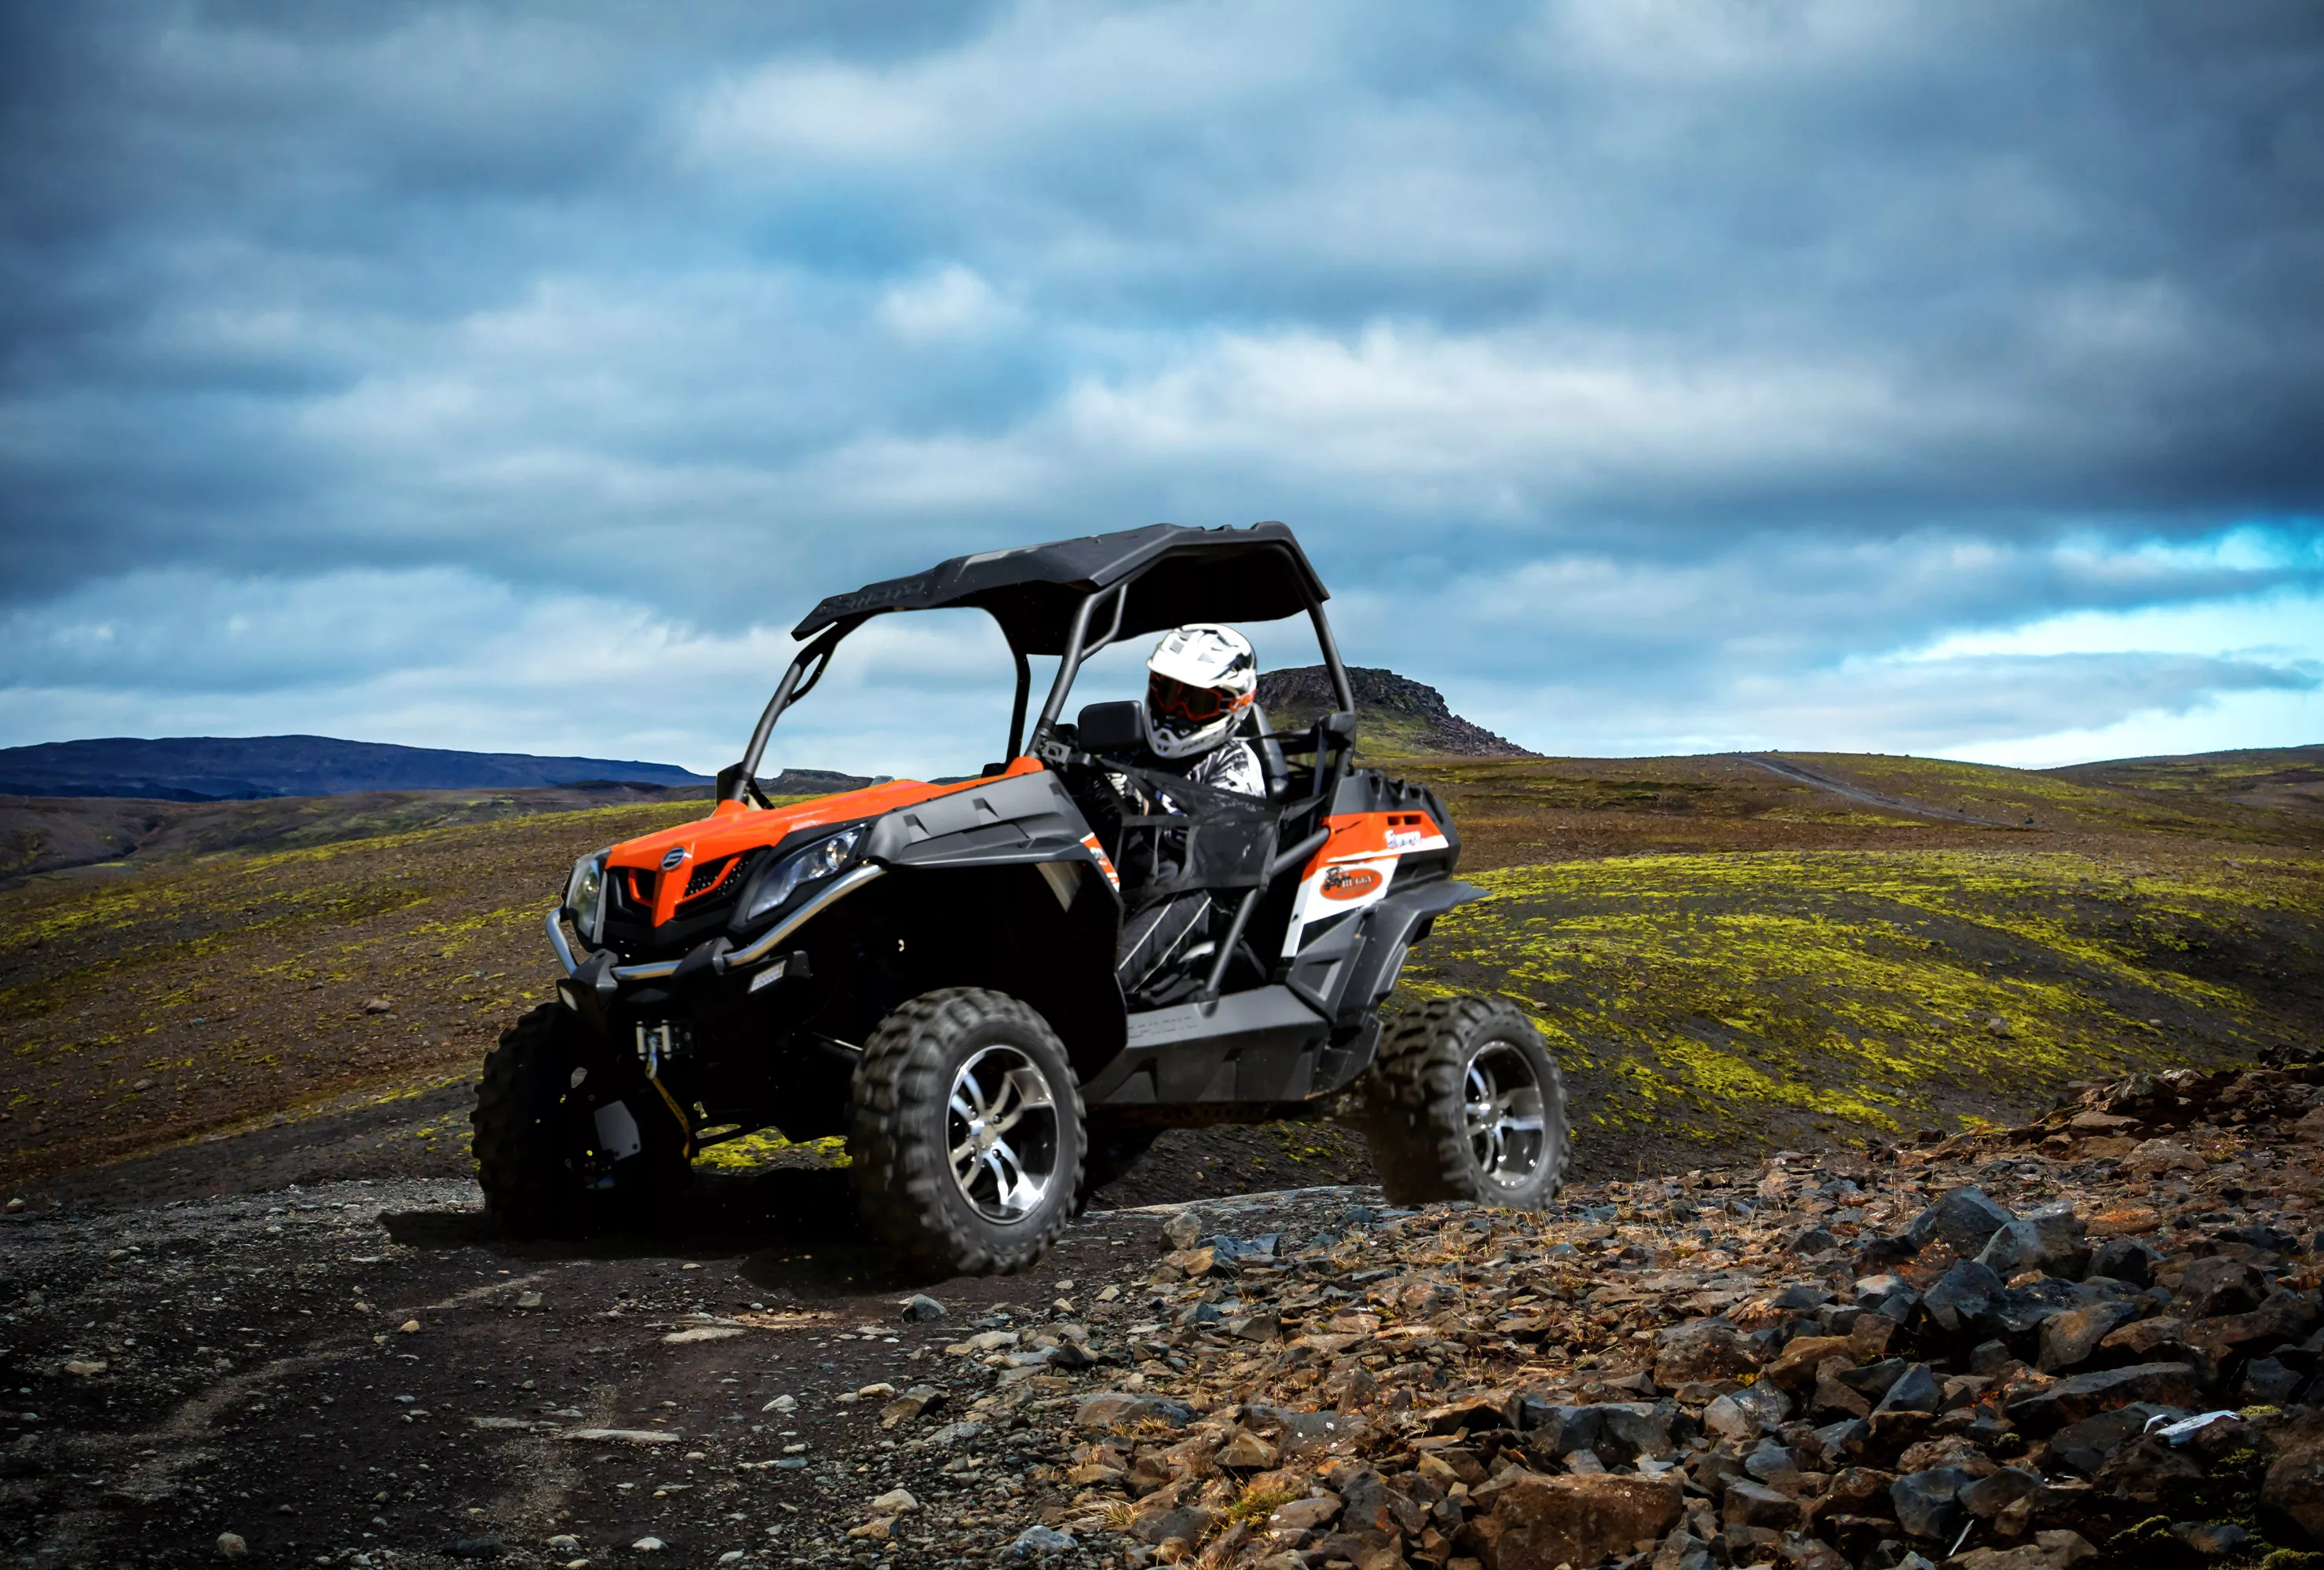 Awesome ATV Rentals in USA, North America | ATVs - Rated 1